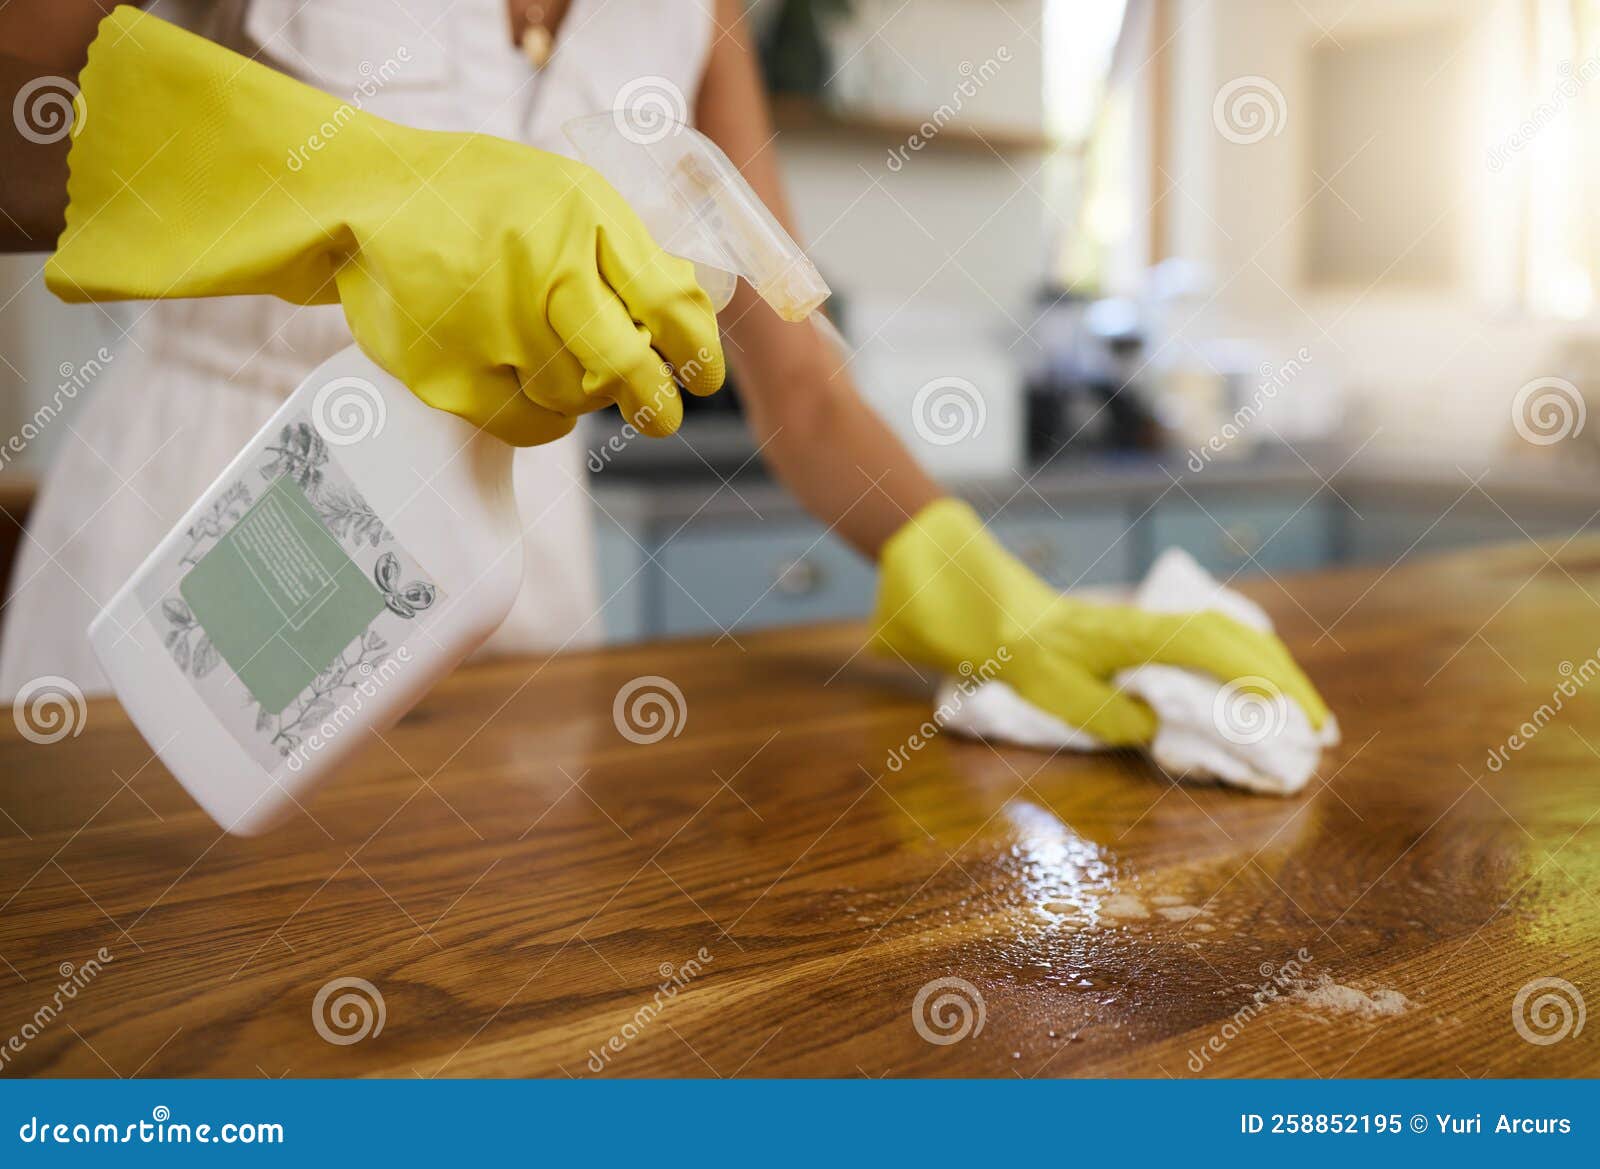 https://thumbs.dreamstime.com/z/cleaning-service-hands-dust-table-as-cleaner-sprays-kitchen-counter-dirty-furniture-home-worker-janitor-washing-258852195.jpg